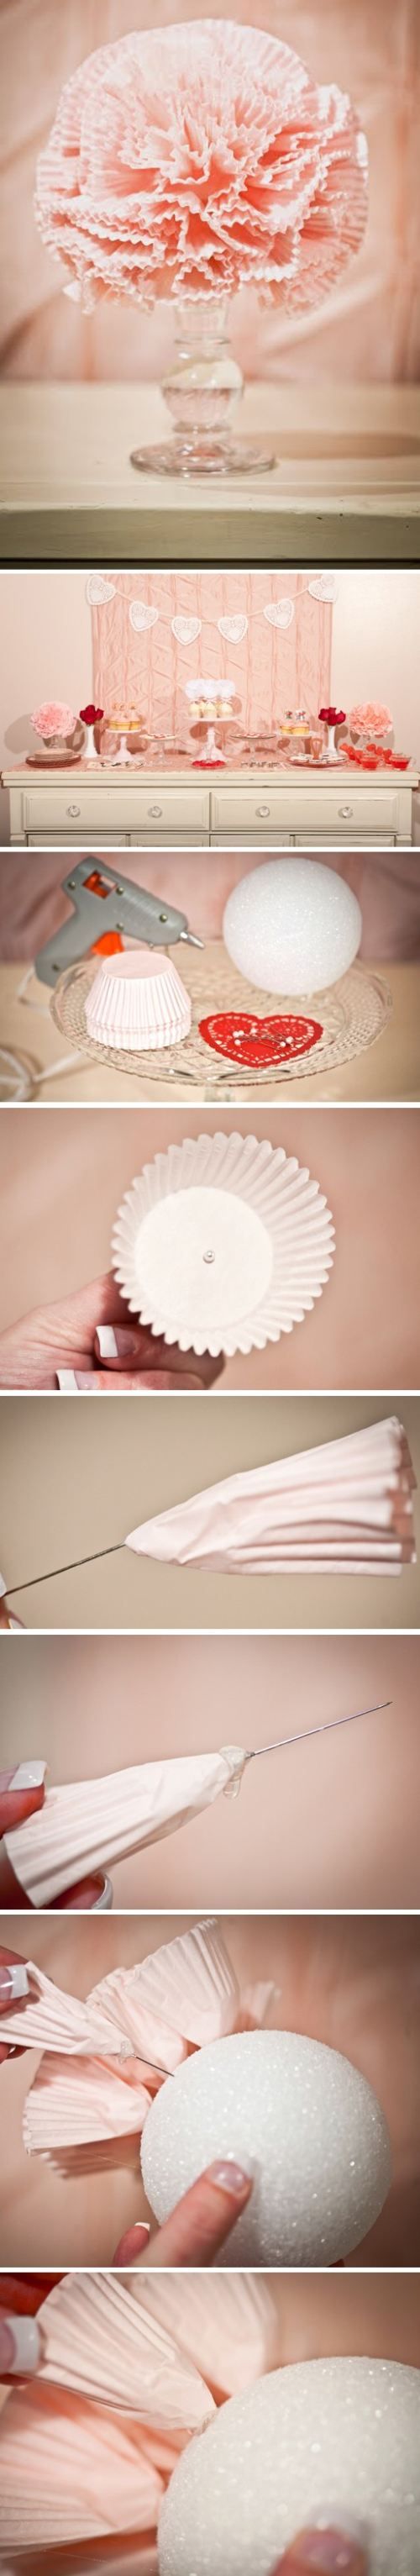 DIY Decoration for a wedding or baby shower